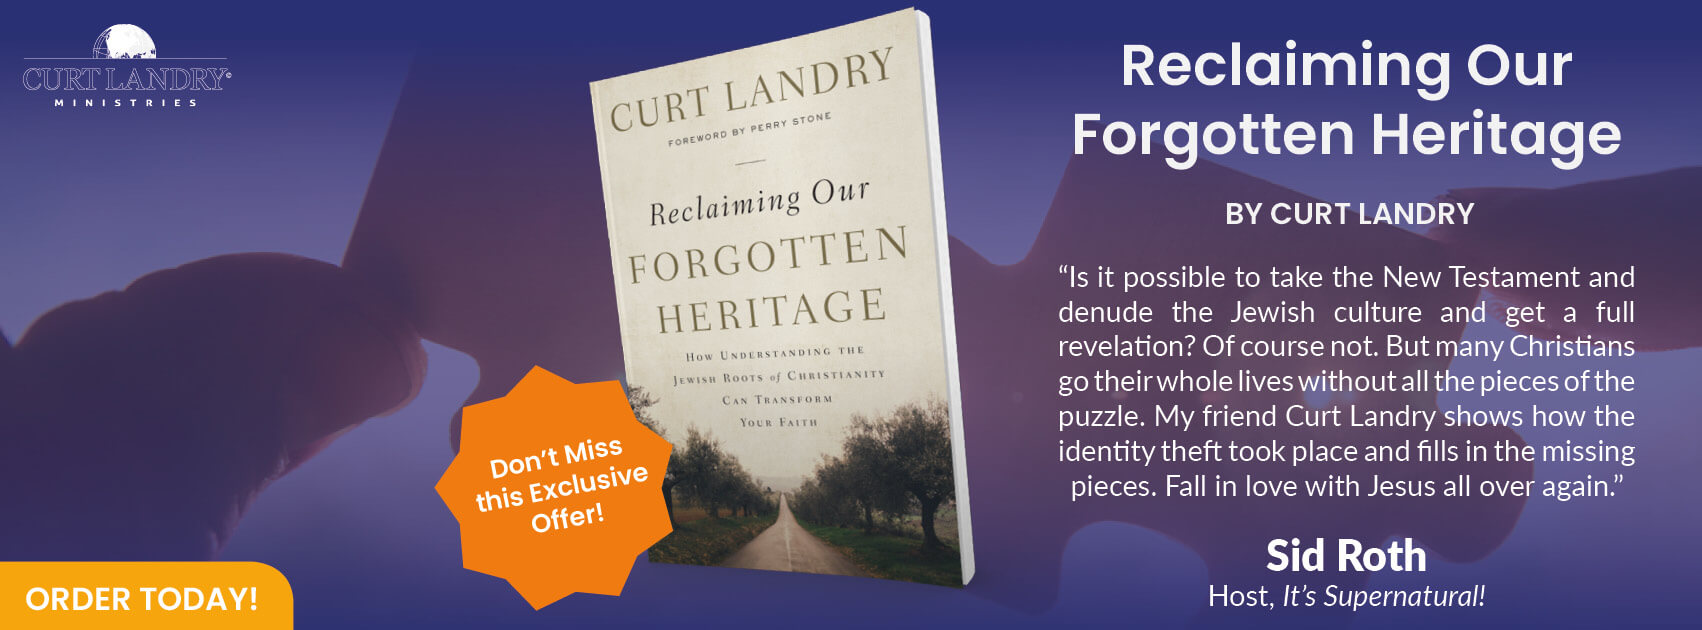 Click here to buy your copy of "Reclaiming Our Forgotten Heritage" by Curt Landry.